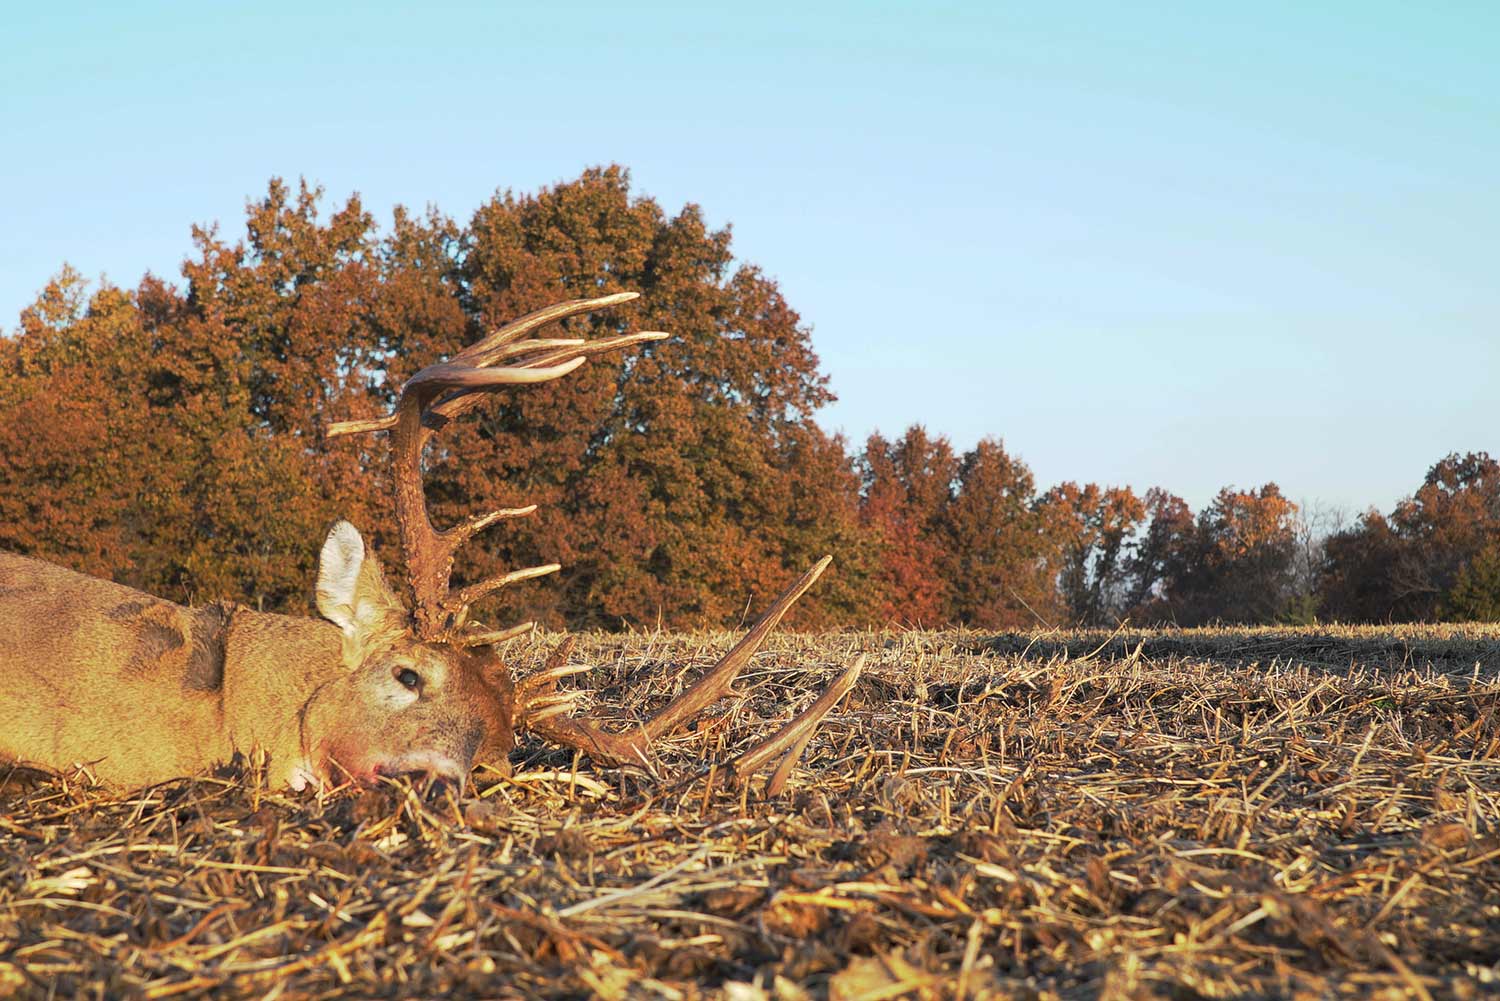 A nontypical whitetail buck in a food plot.